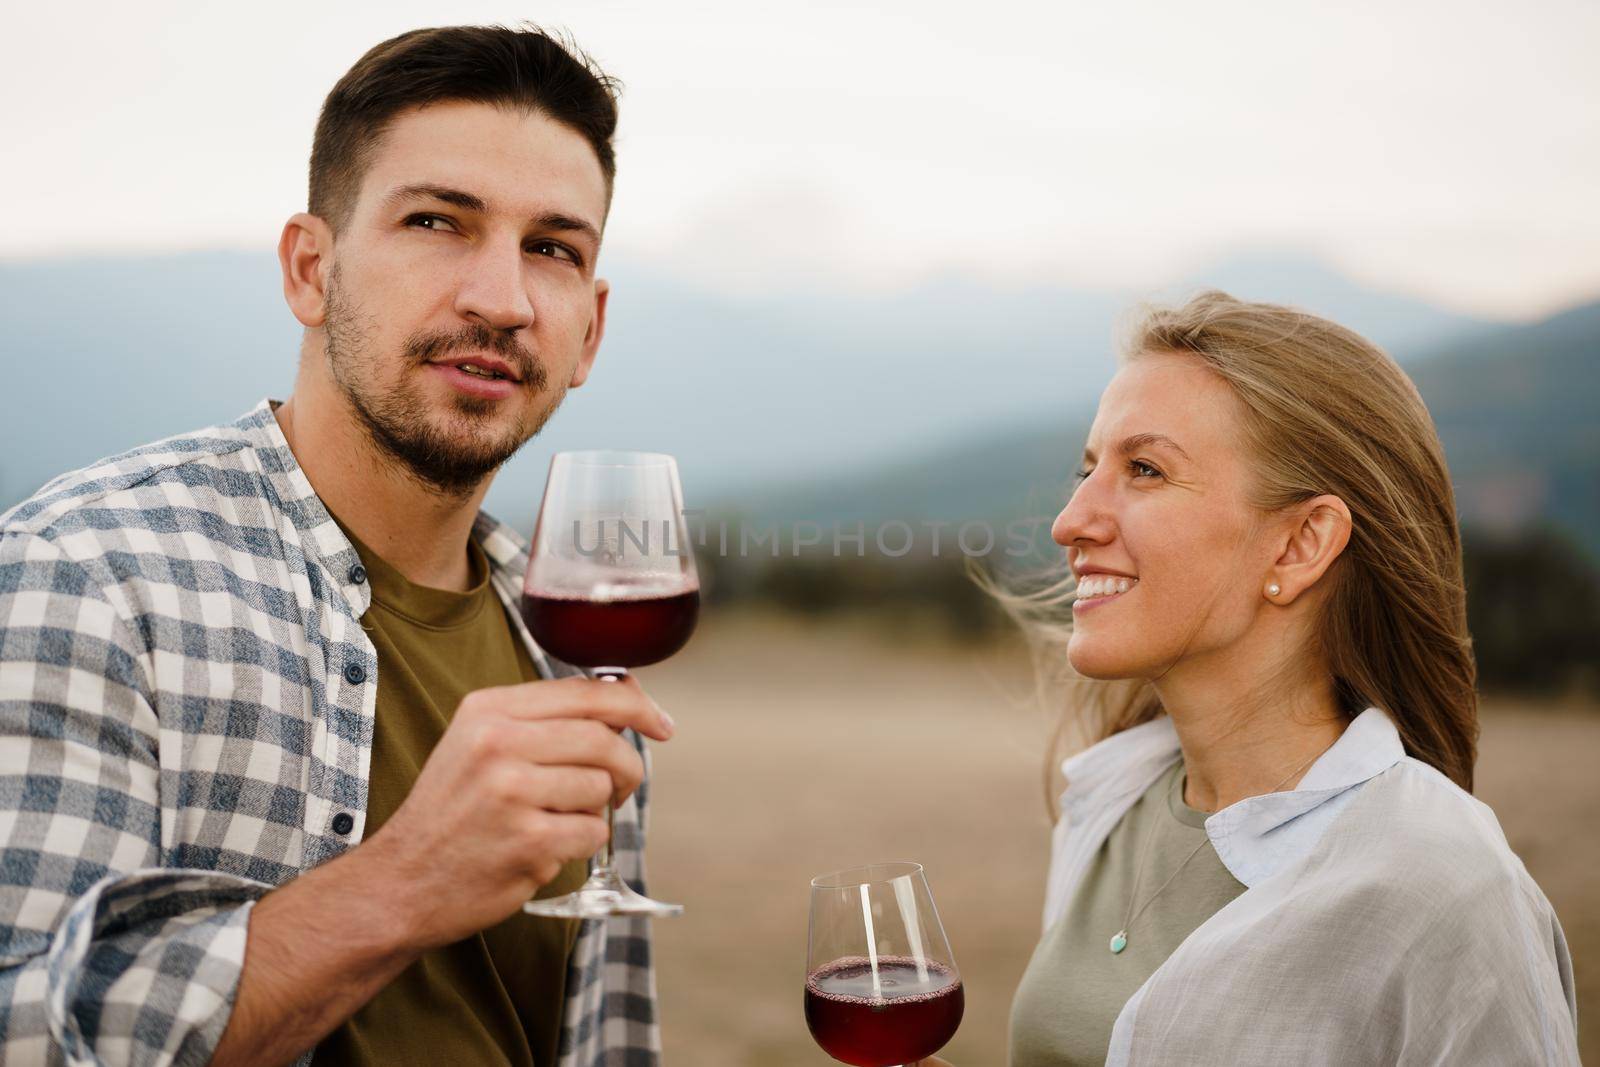 Smiling couple toasting wine glasses outdoors in mountains by Fabrikasimf